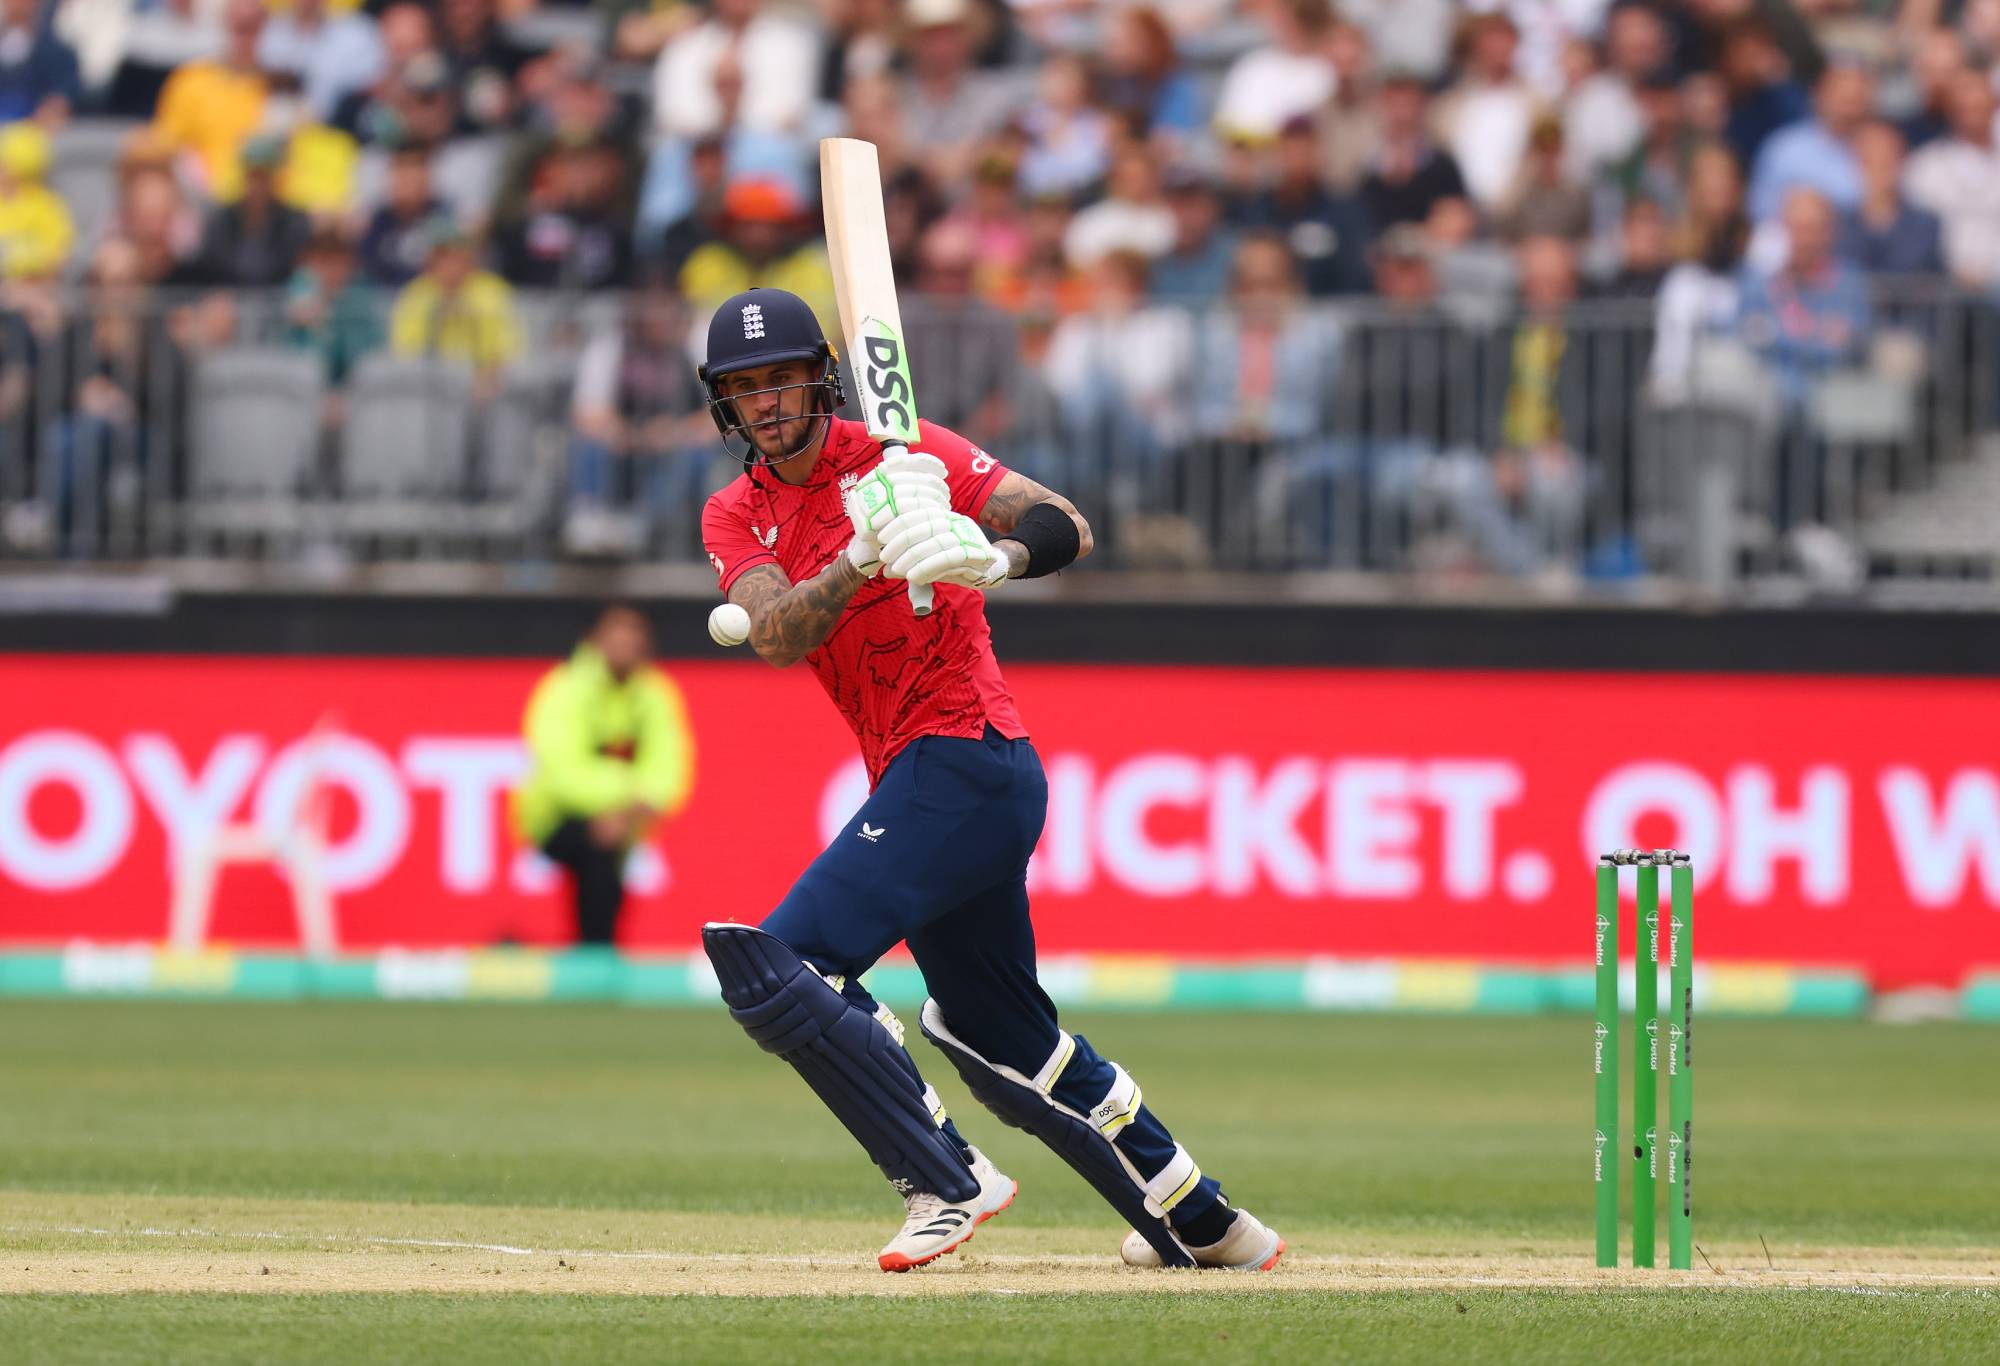 PERTH, AUSTRALIA - OCTOBER 09: Alex Hales of England watches the ball after his shot during game one of the T20 International series between Australia and England at Optus Stadium on October 09, 2022 in Perth, Australia. (Photo by James Worsfold/Getty Images)